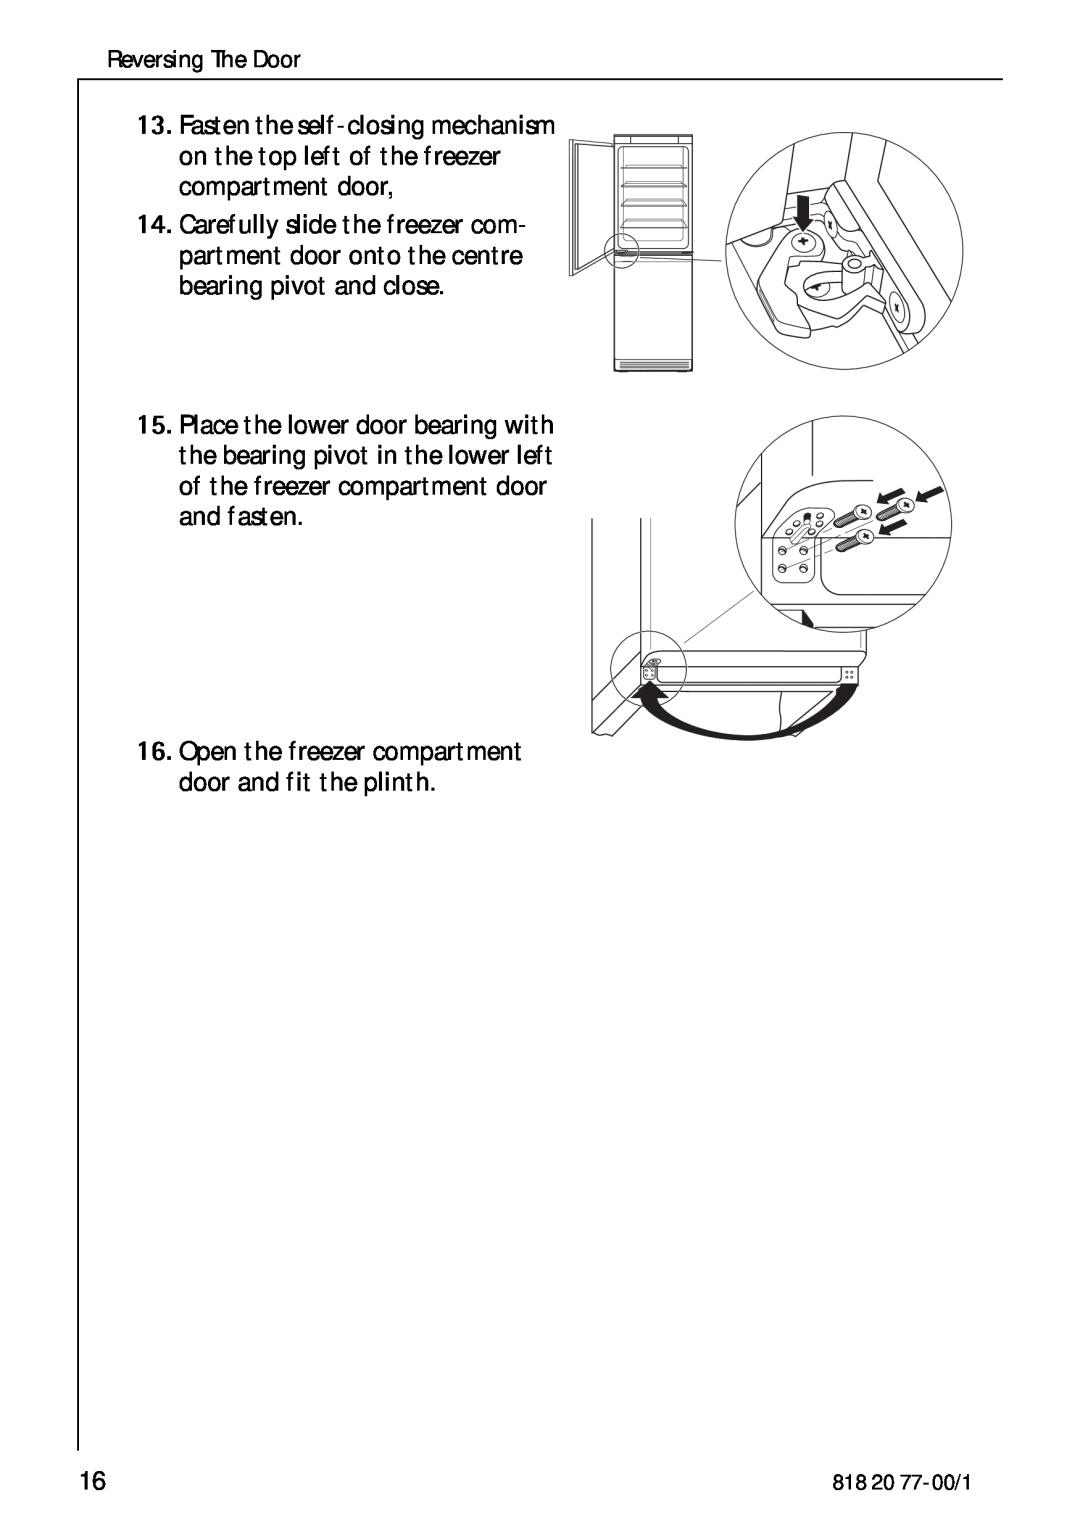 Electrolux 3985-7 KG manual Fasten the self-closing mechanism on the top left of the freezer compartment door 